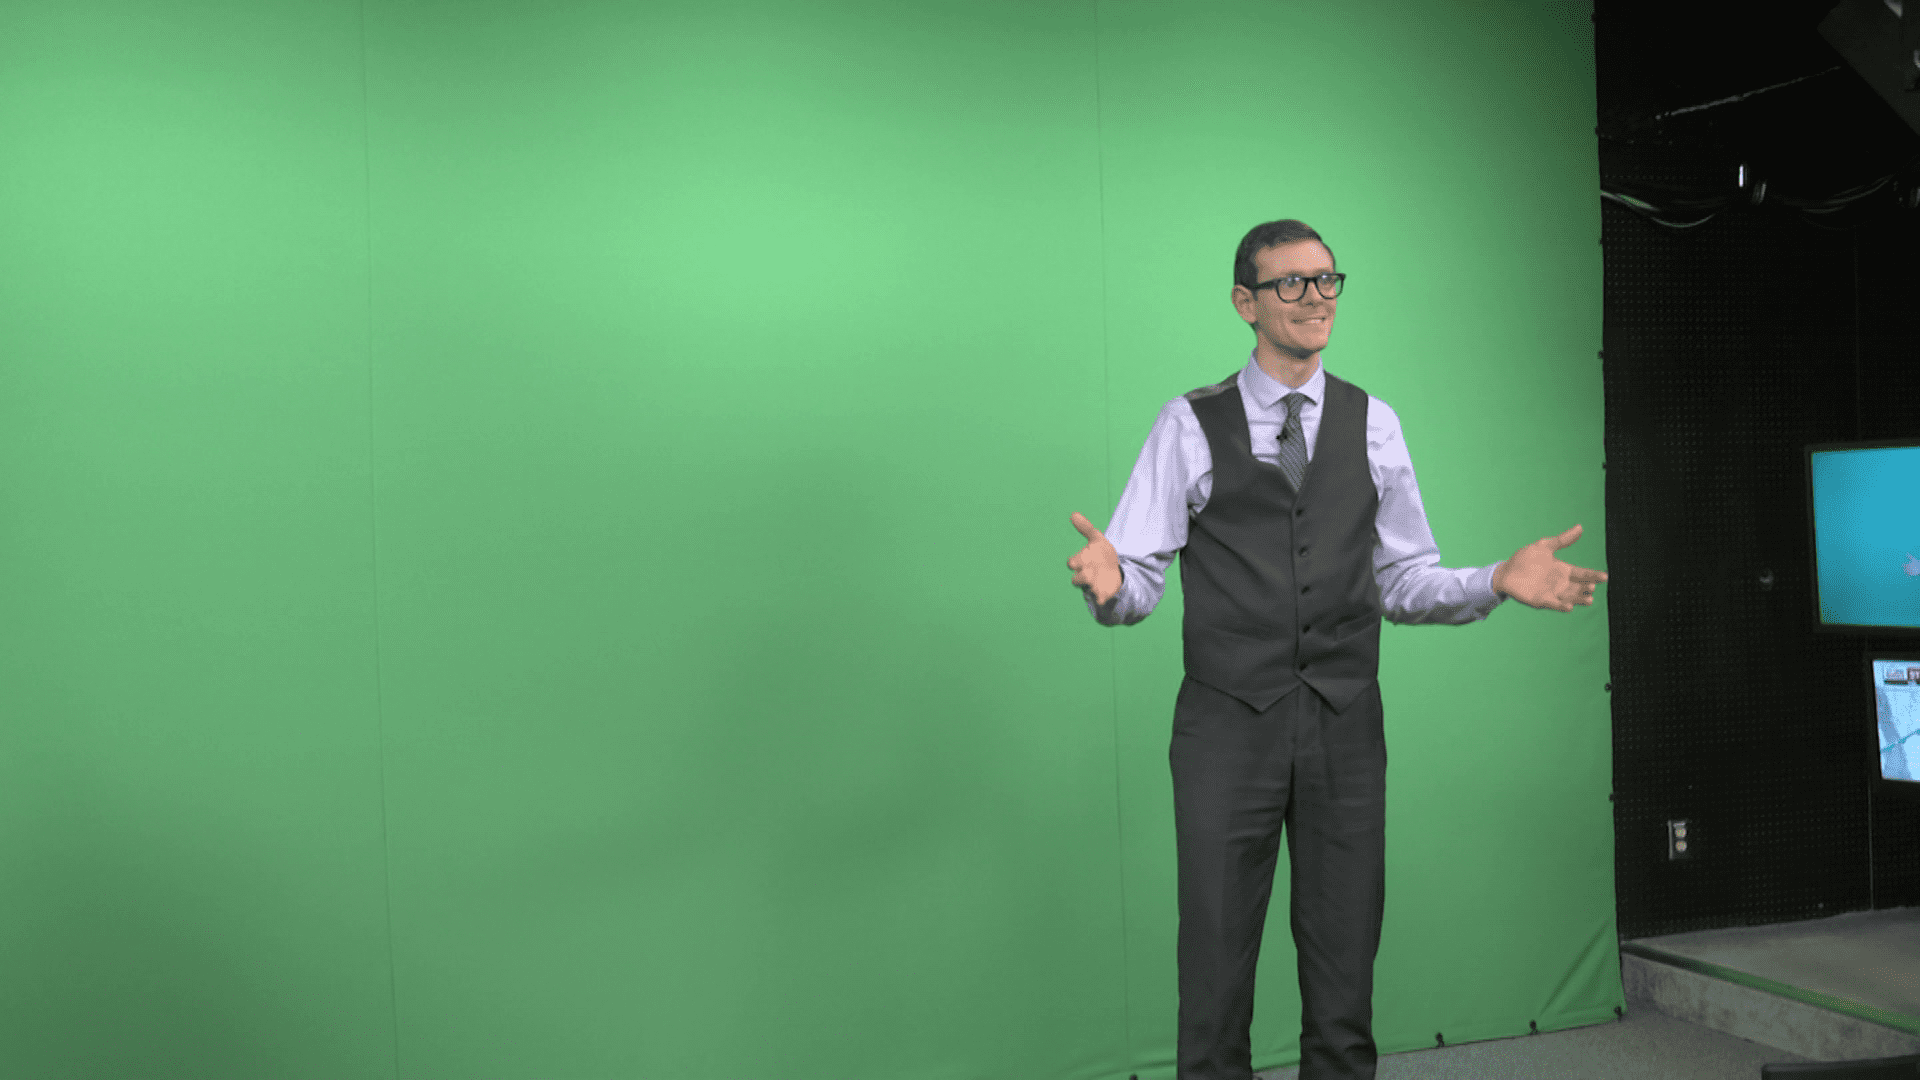 Brandon in front of a green screen